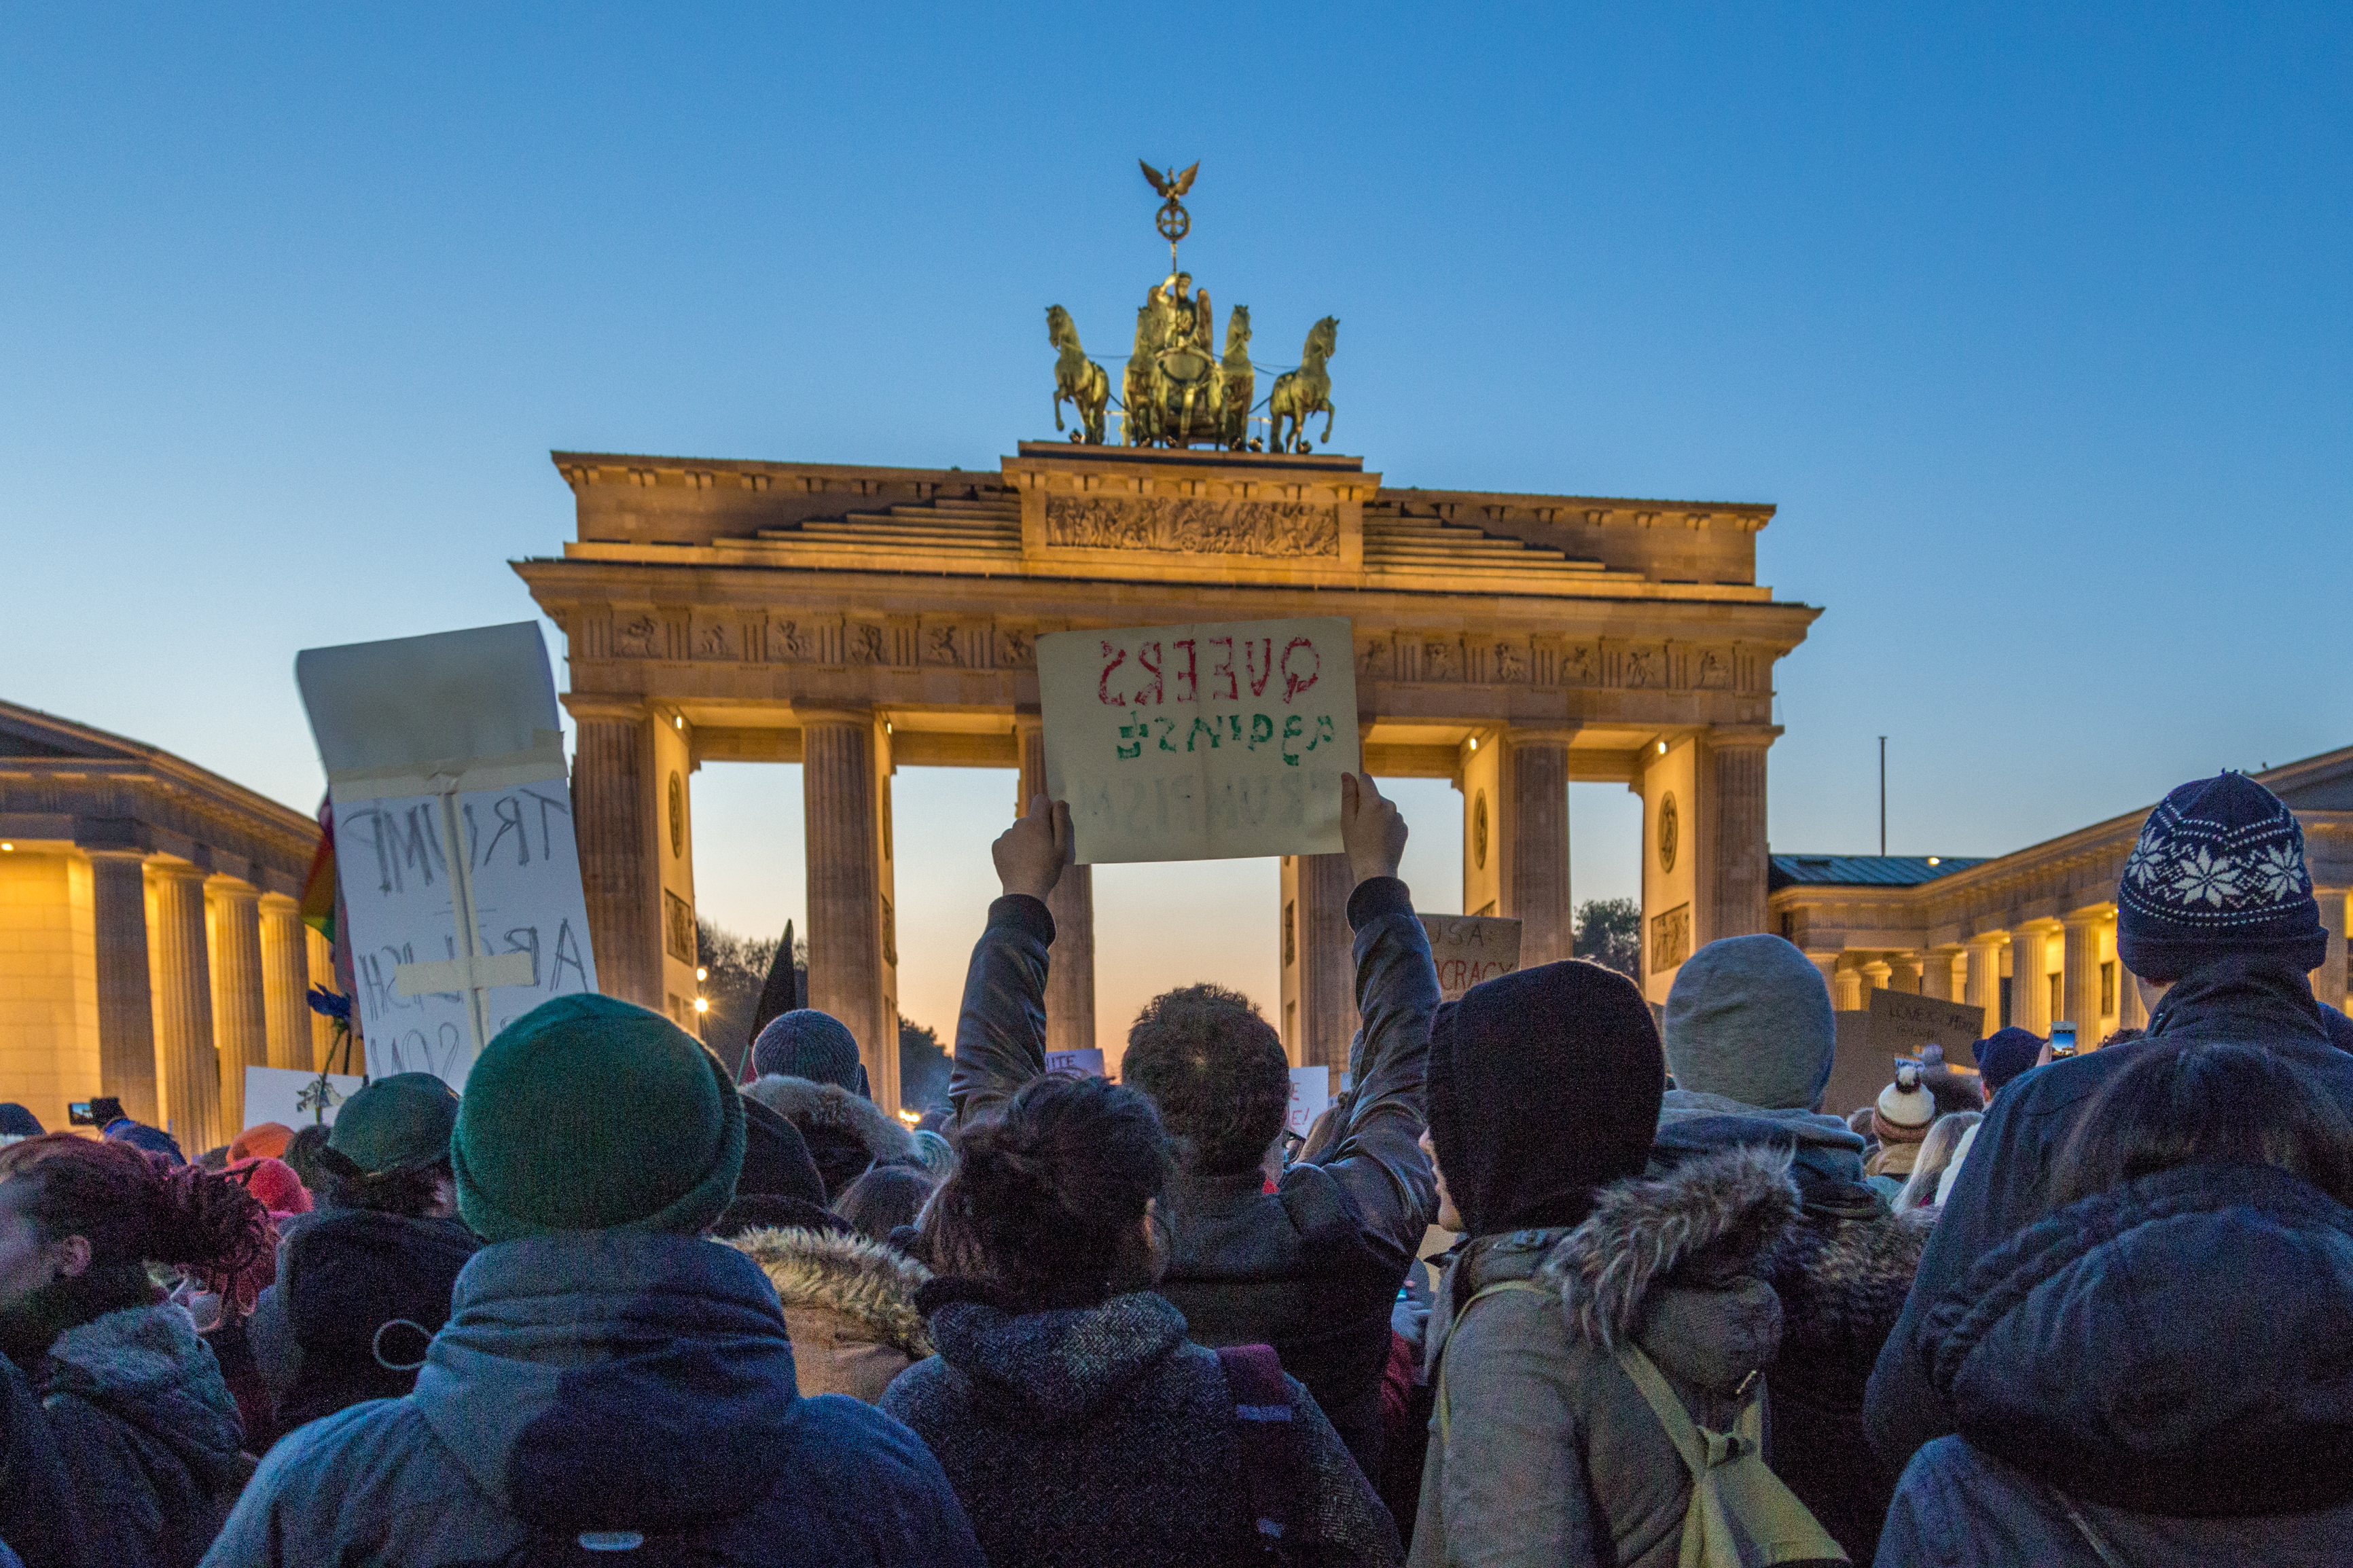 At the iconic Brandenburger Gate in Berlin, infront of the